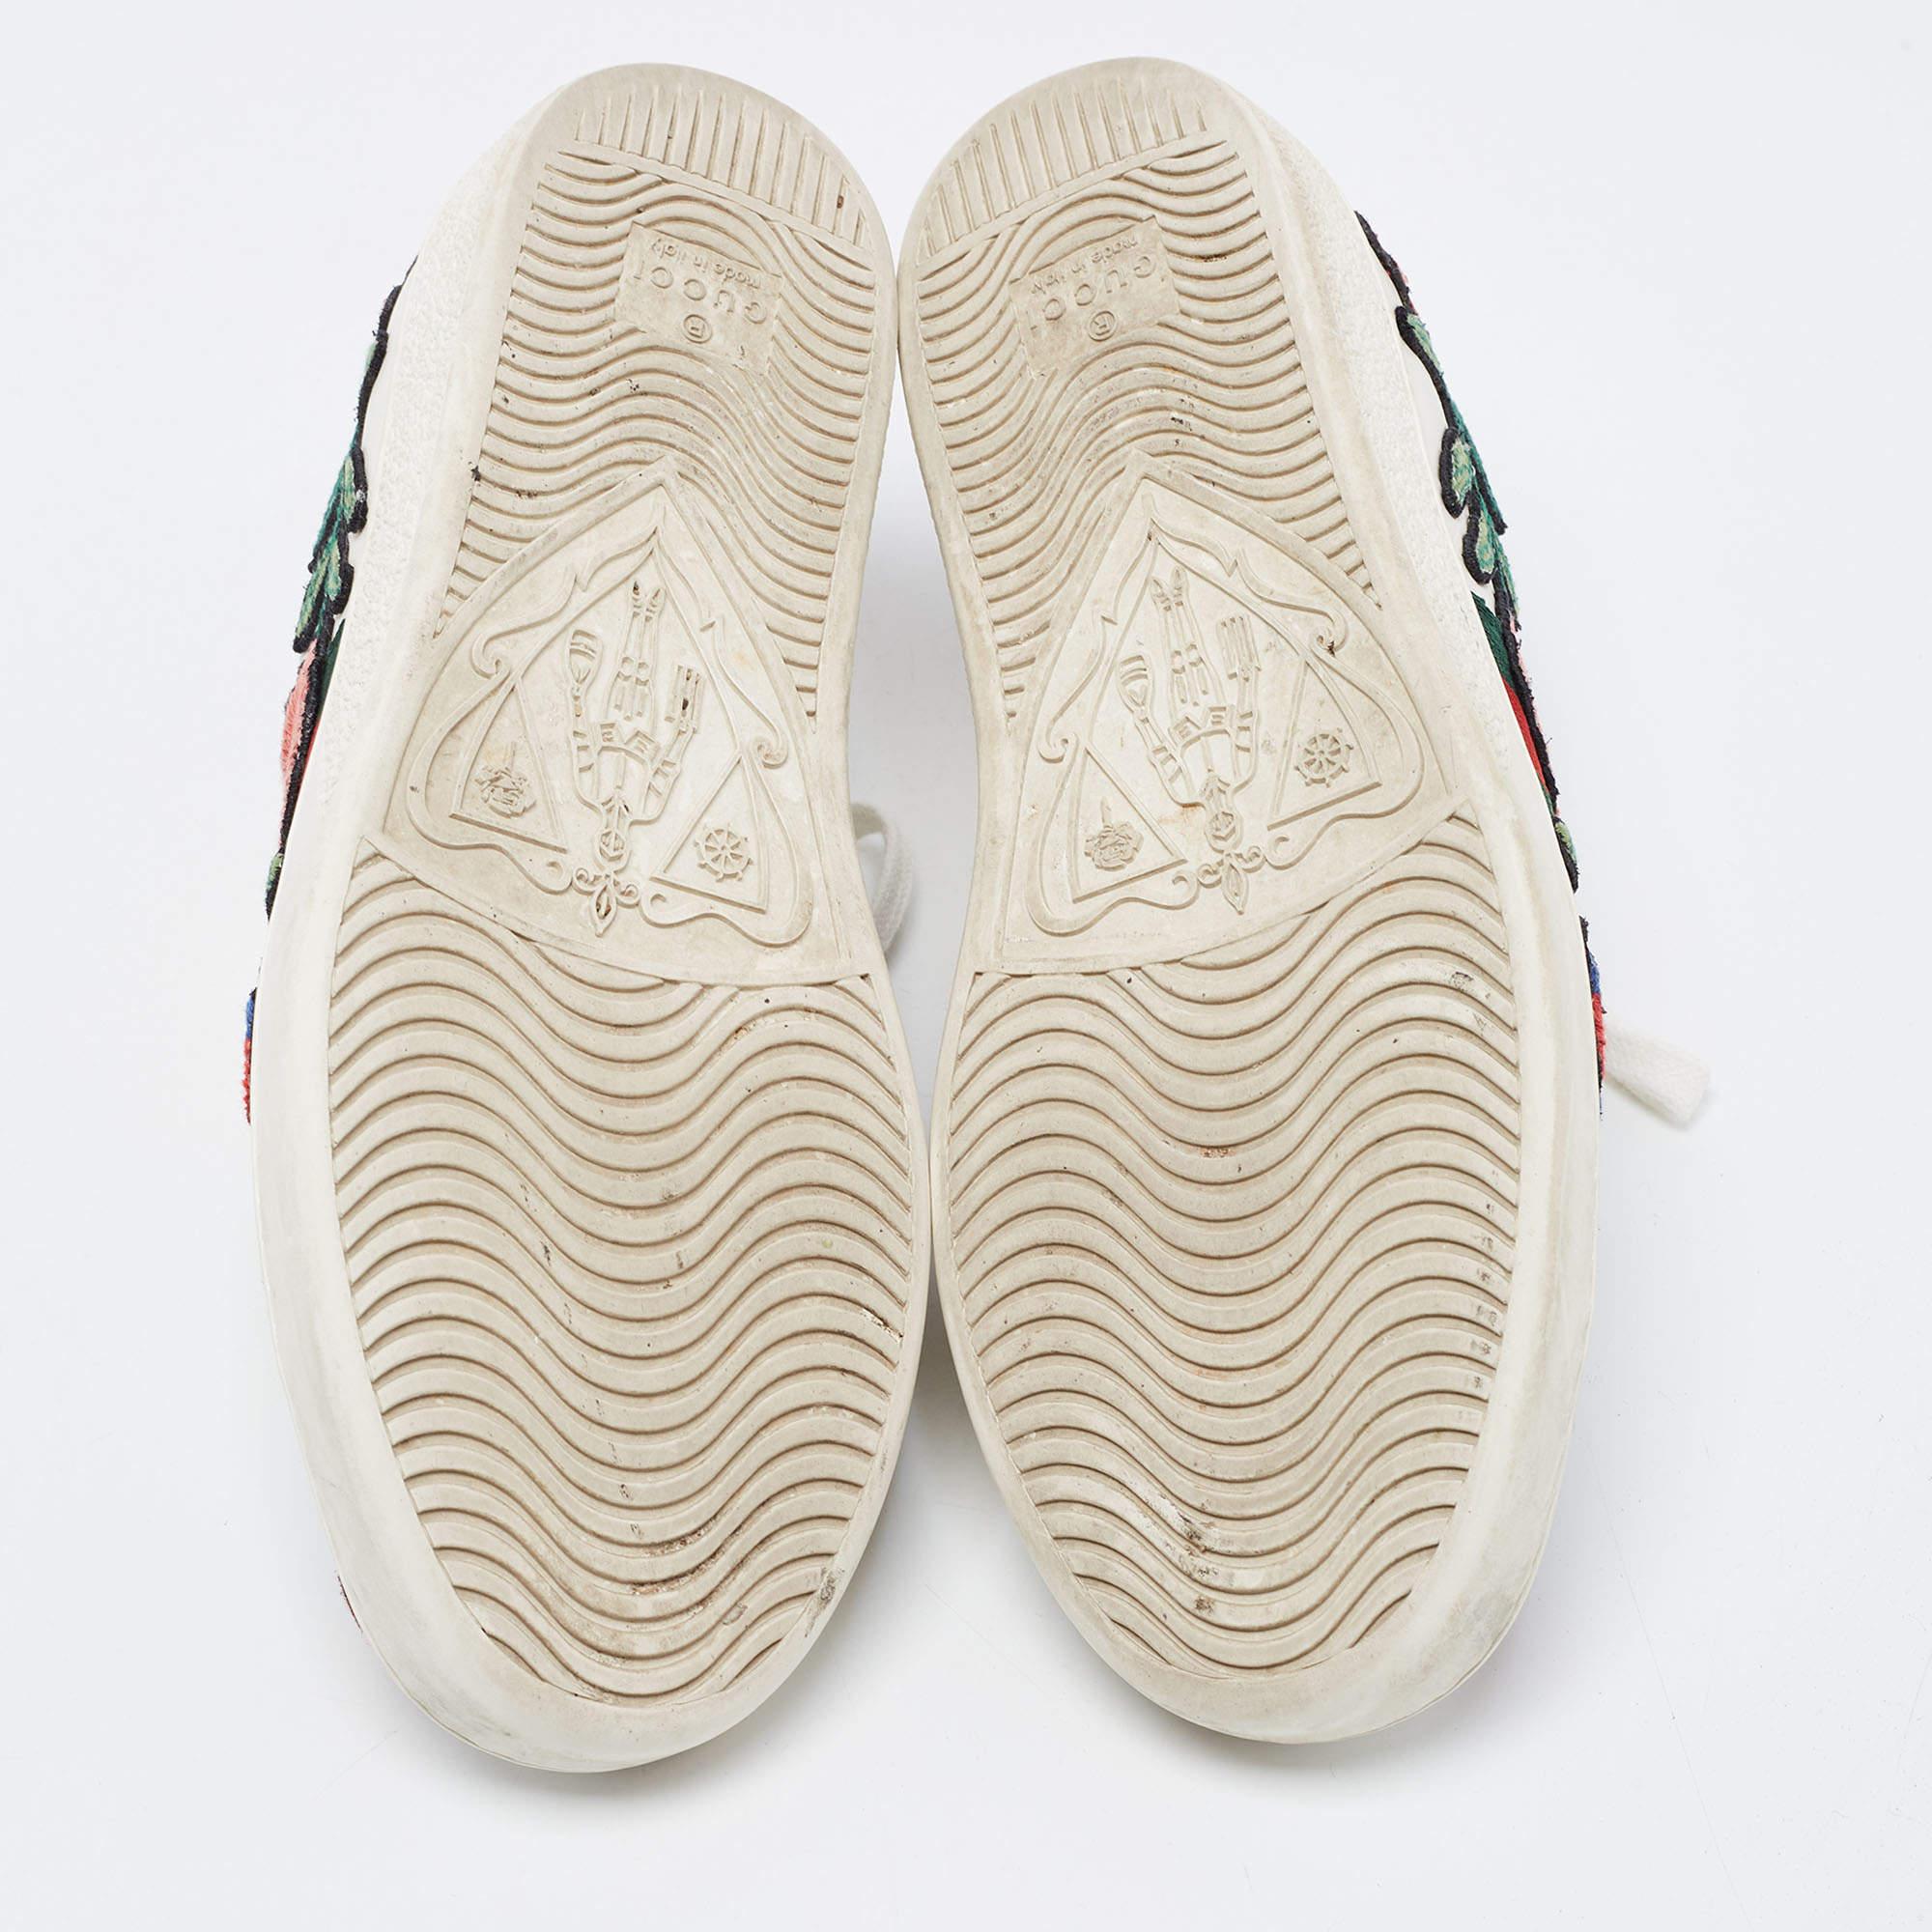 Gucci White Leather Embroidered Floral Ace Sneakers Size 34.5 3